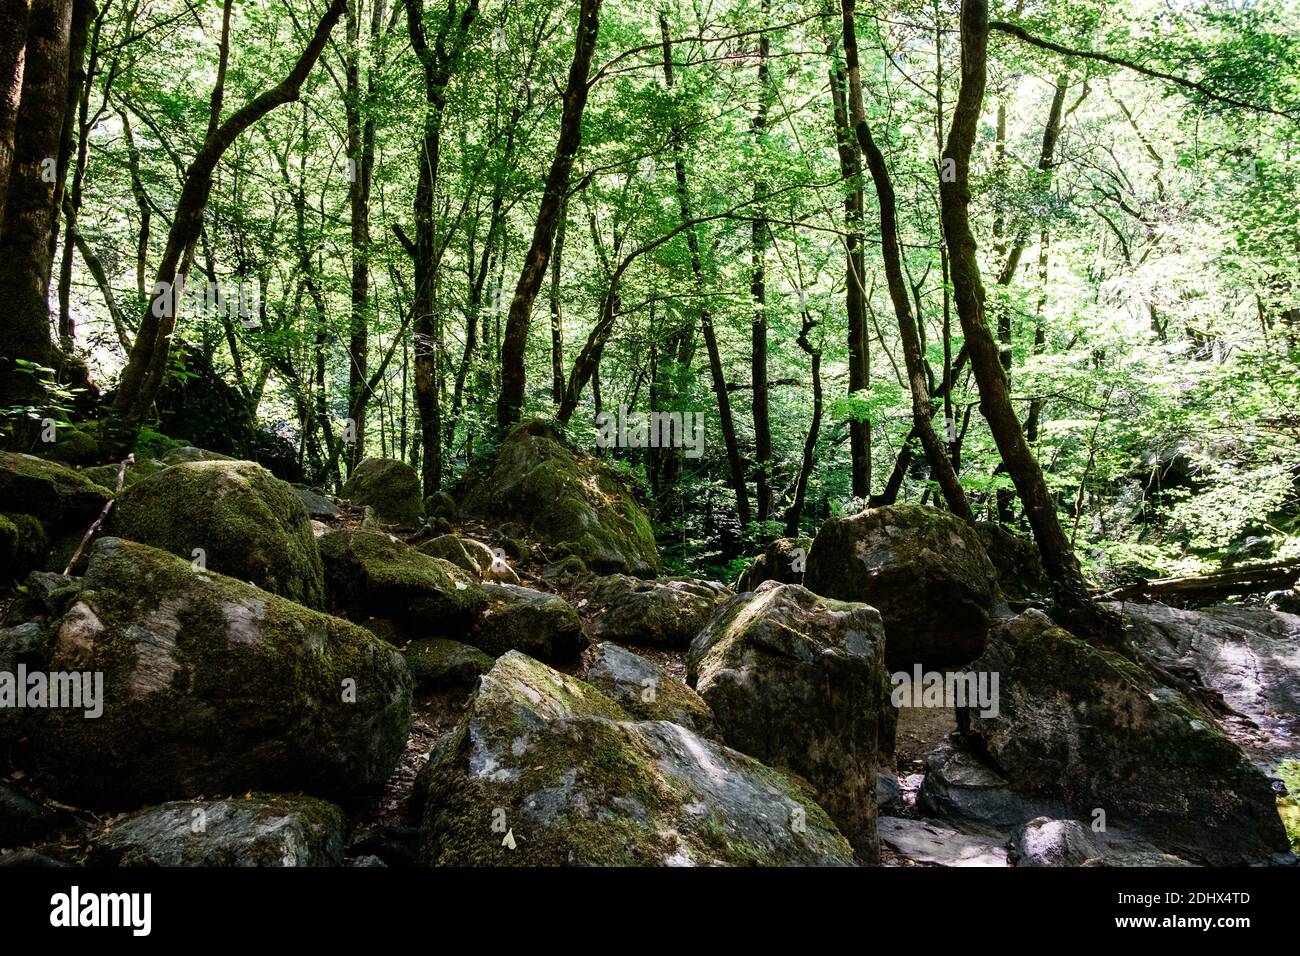 A forest with green leafts, trees, rocks in the foreground. Stock Photo